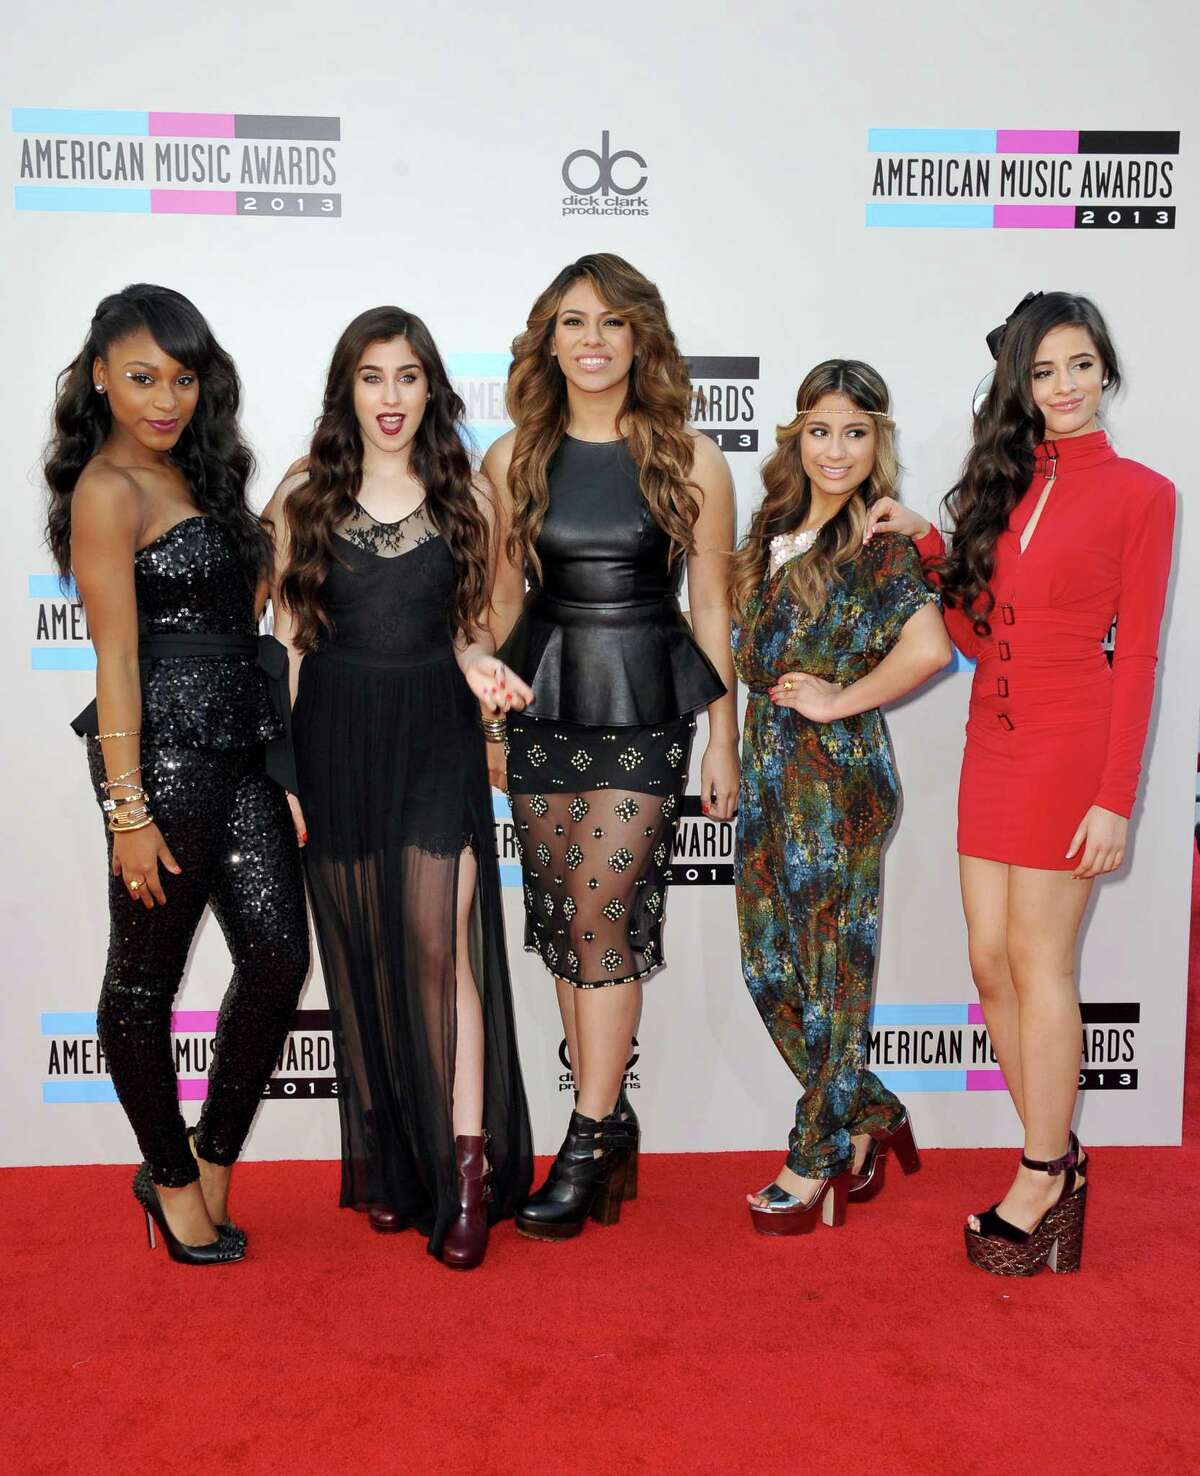 Members of Fifth Harmony, from left, Normani Kordei, Lauren Jauregui, Dinah Jane Hansen, Ally Brooke, and Camila Cabello arrive at the American Music Awards at the Nokia Theatre L.A. Live on Sunday, Nov. 24, 2013, in Los Angeles. (Photo by Jordan Strauss/Invision/AP) ORG XMIT: CACJ122